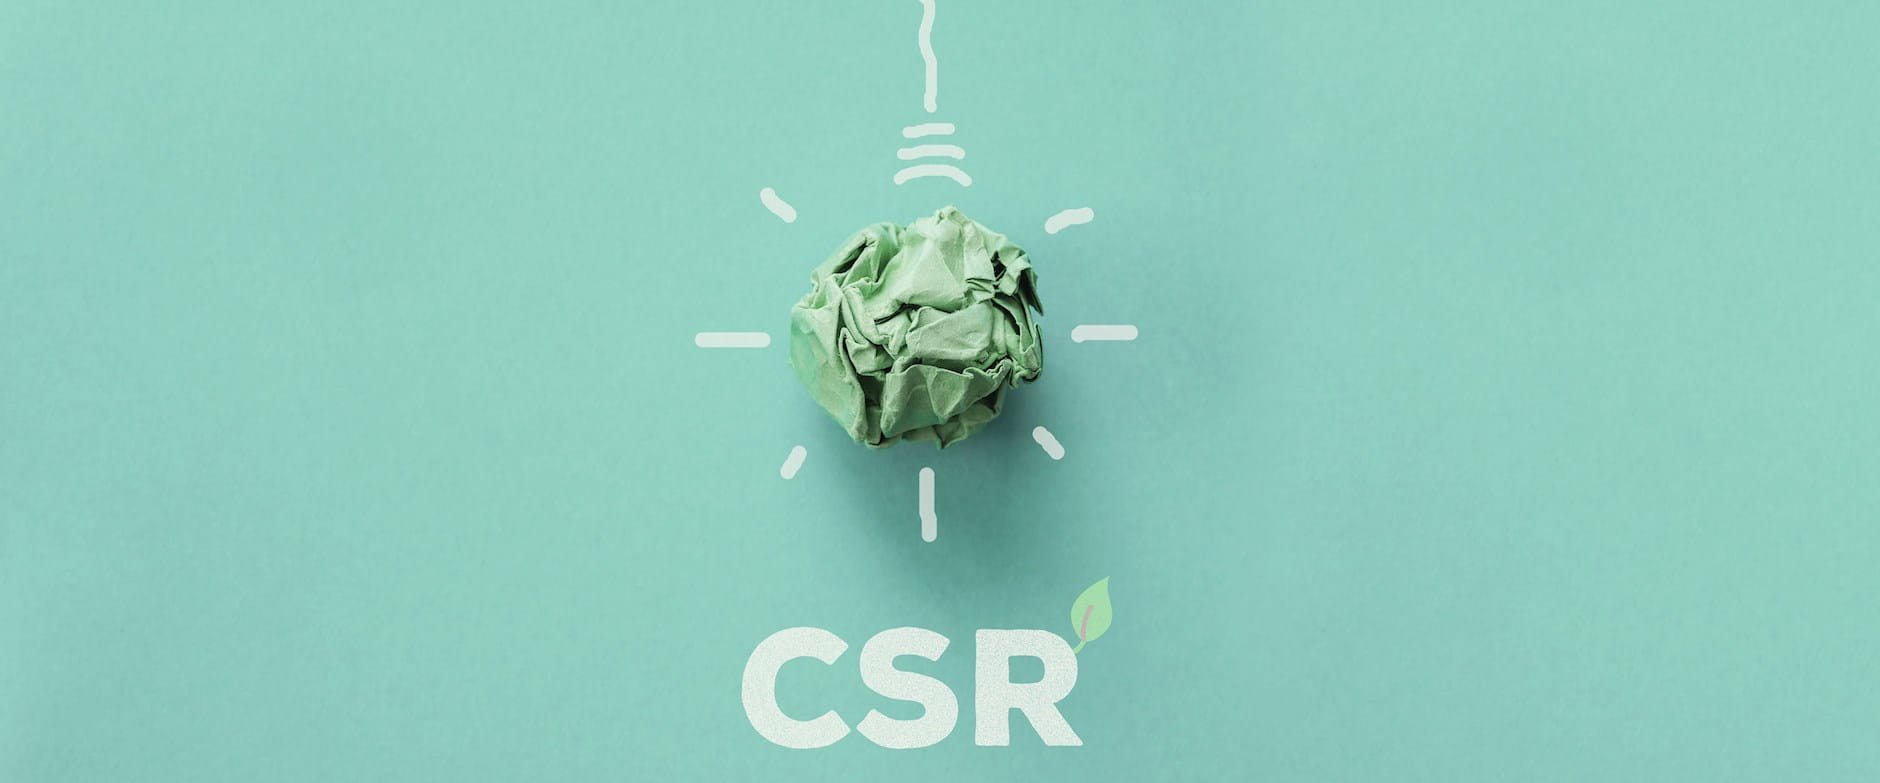 A balled on piece of paper made to look like a lightbulb; the letters "CSR" are spelled out below it; the "R" has a little leaf coming off the side